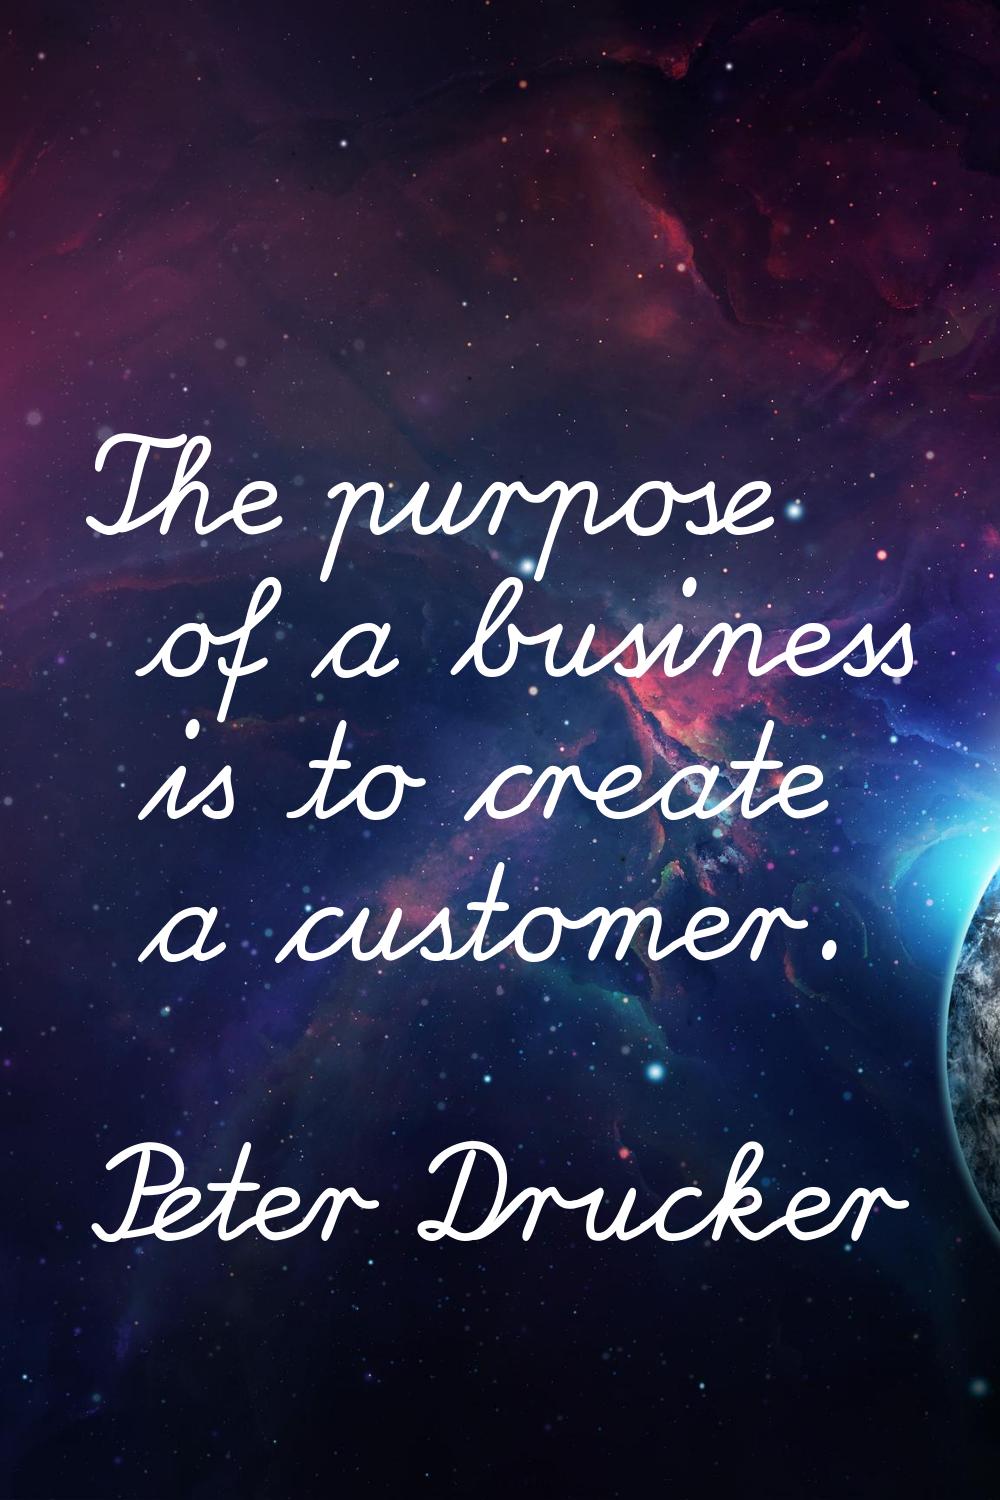 The purpose of a business is to create a customer.